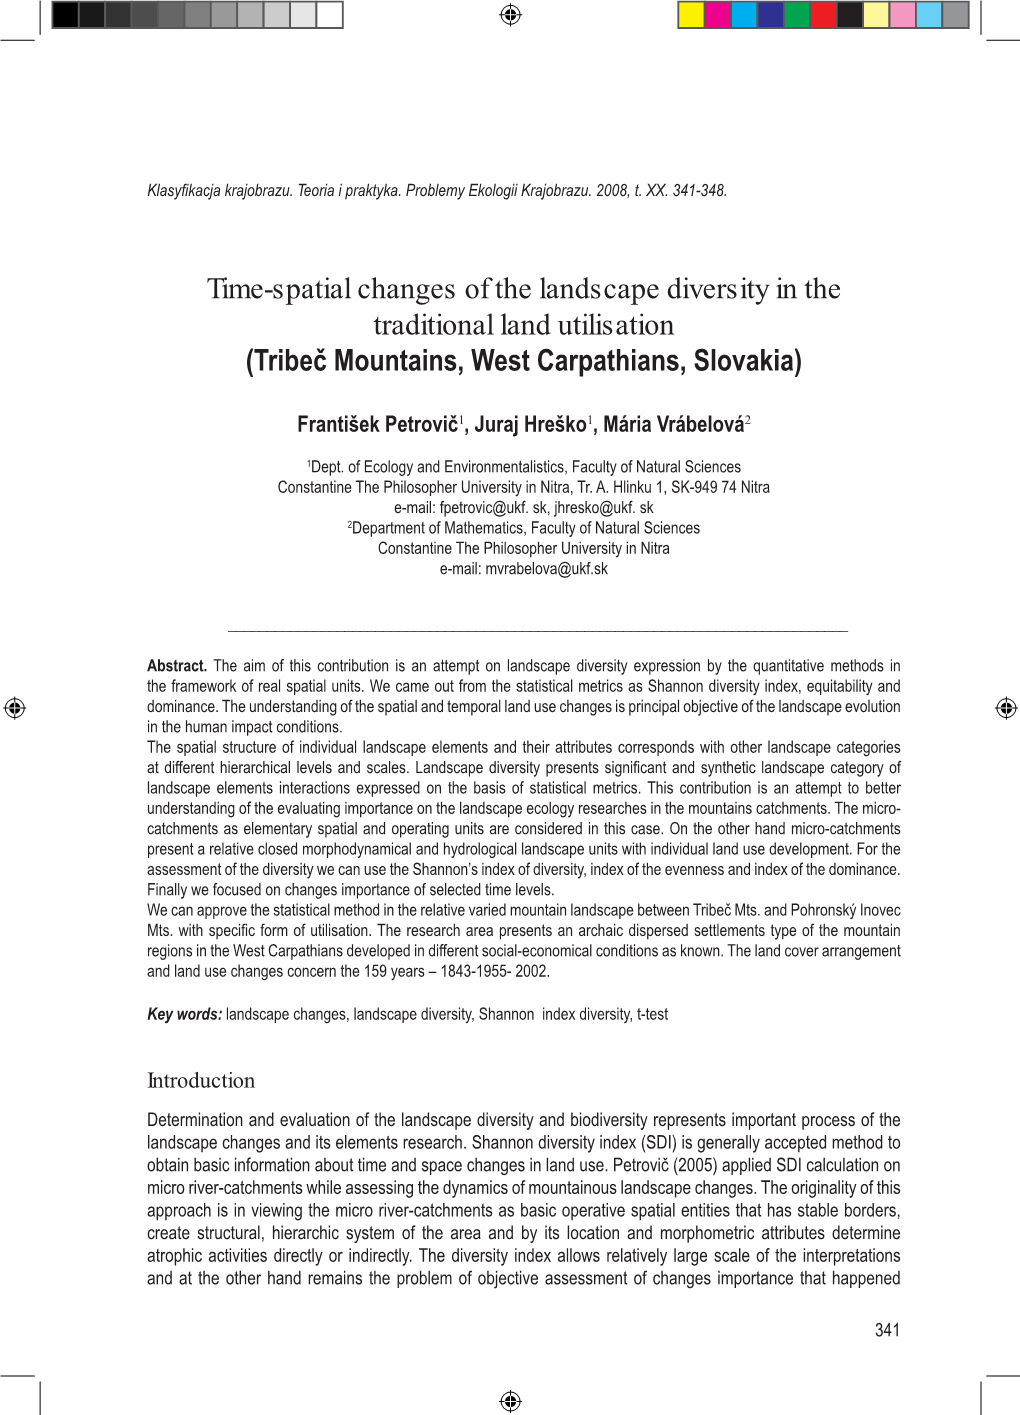 Time-Spatial Changes of the Landscape Diversity in the Traditional Land Utilisation (Tribeč Mo�Ntains, West Carpat�Ians, Sl�Ovakia)